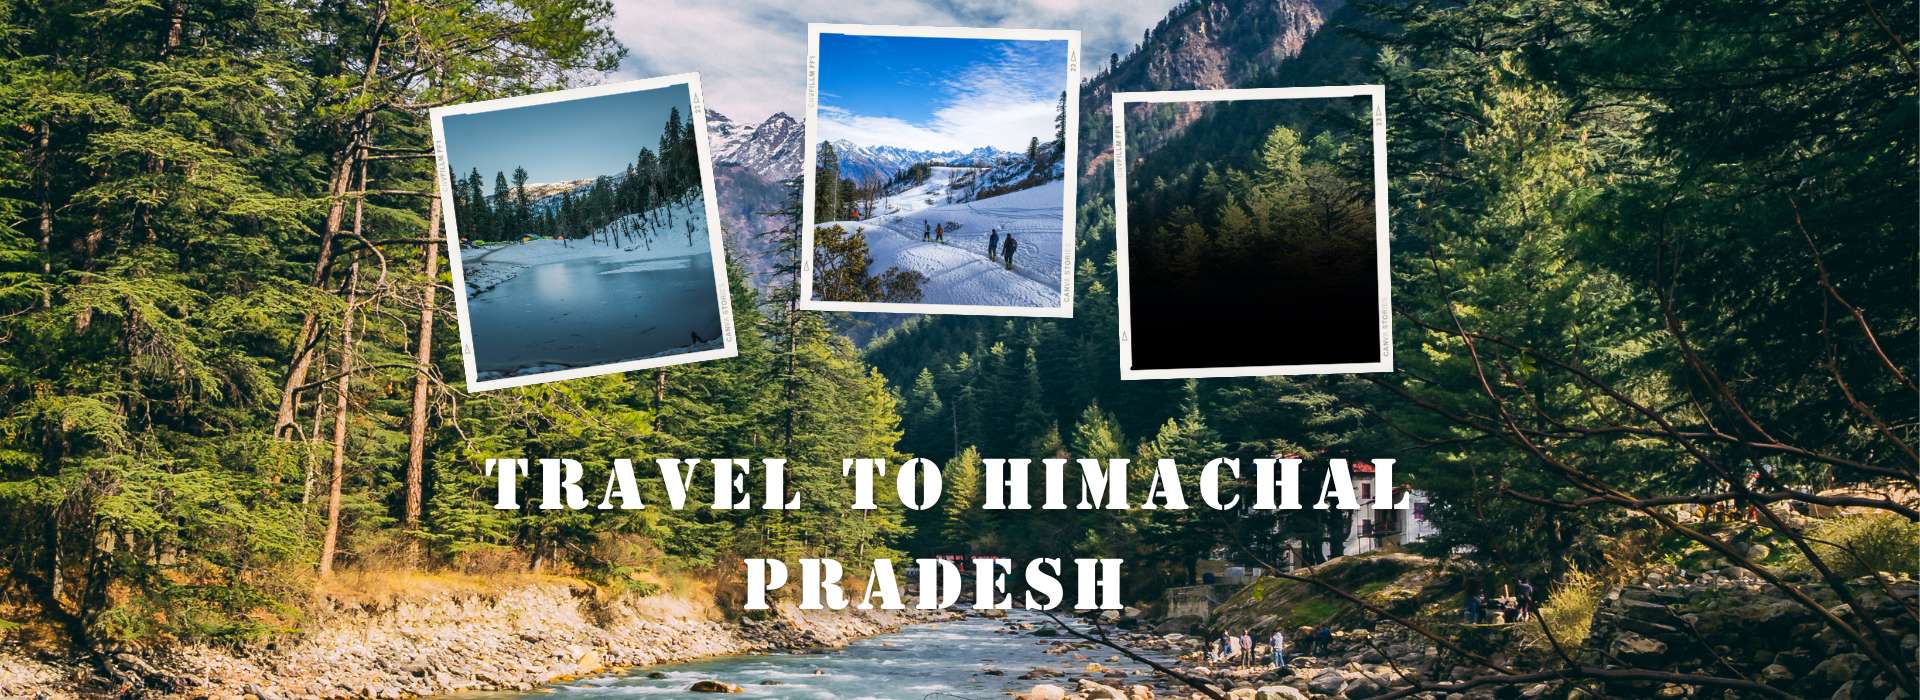 Travel to Himachal